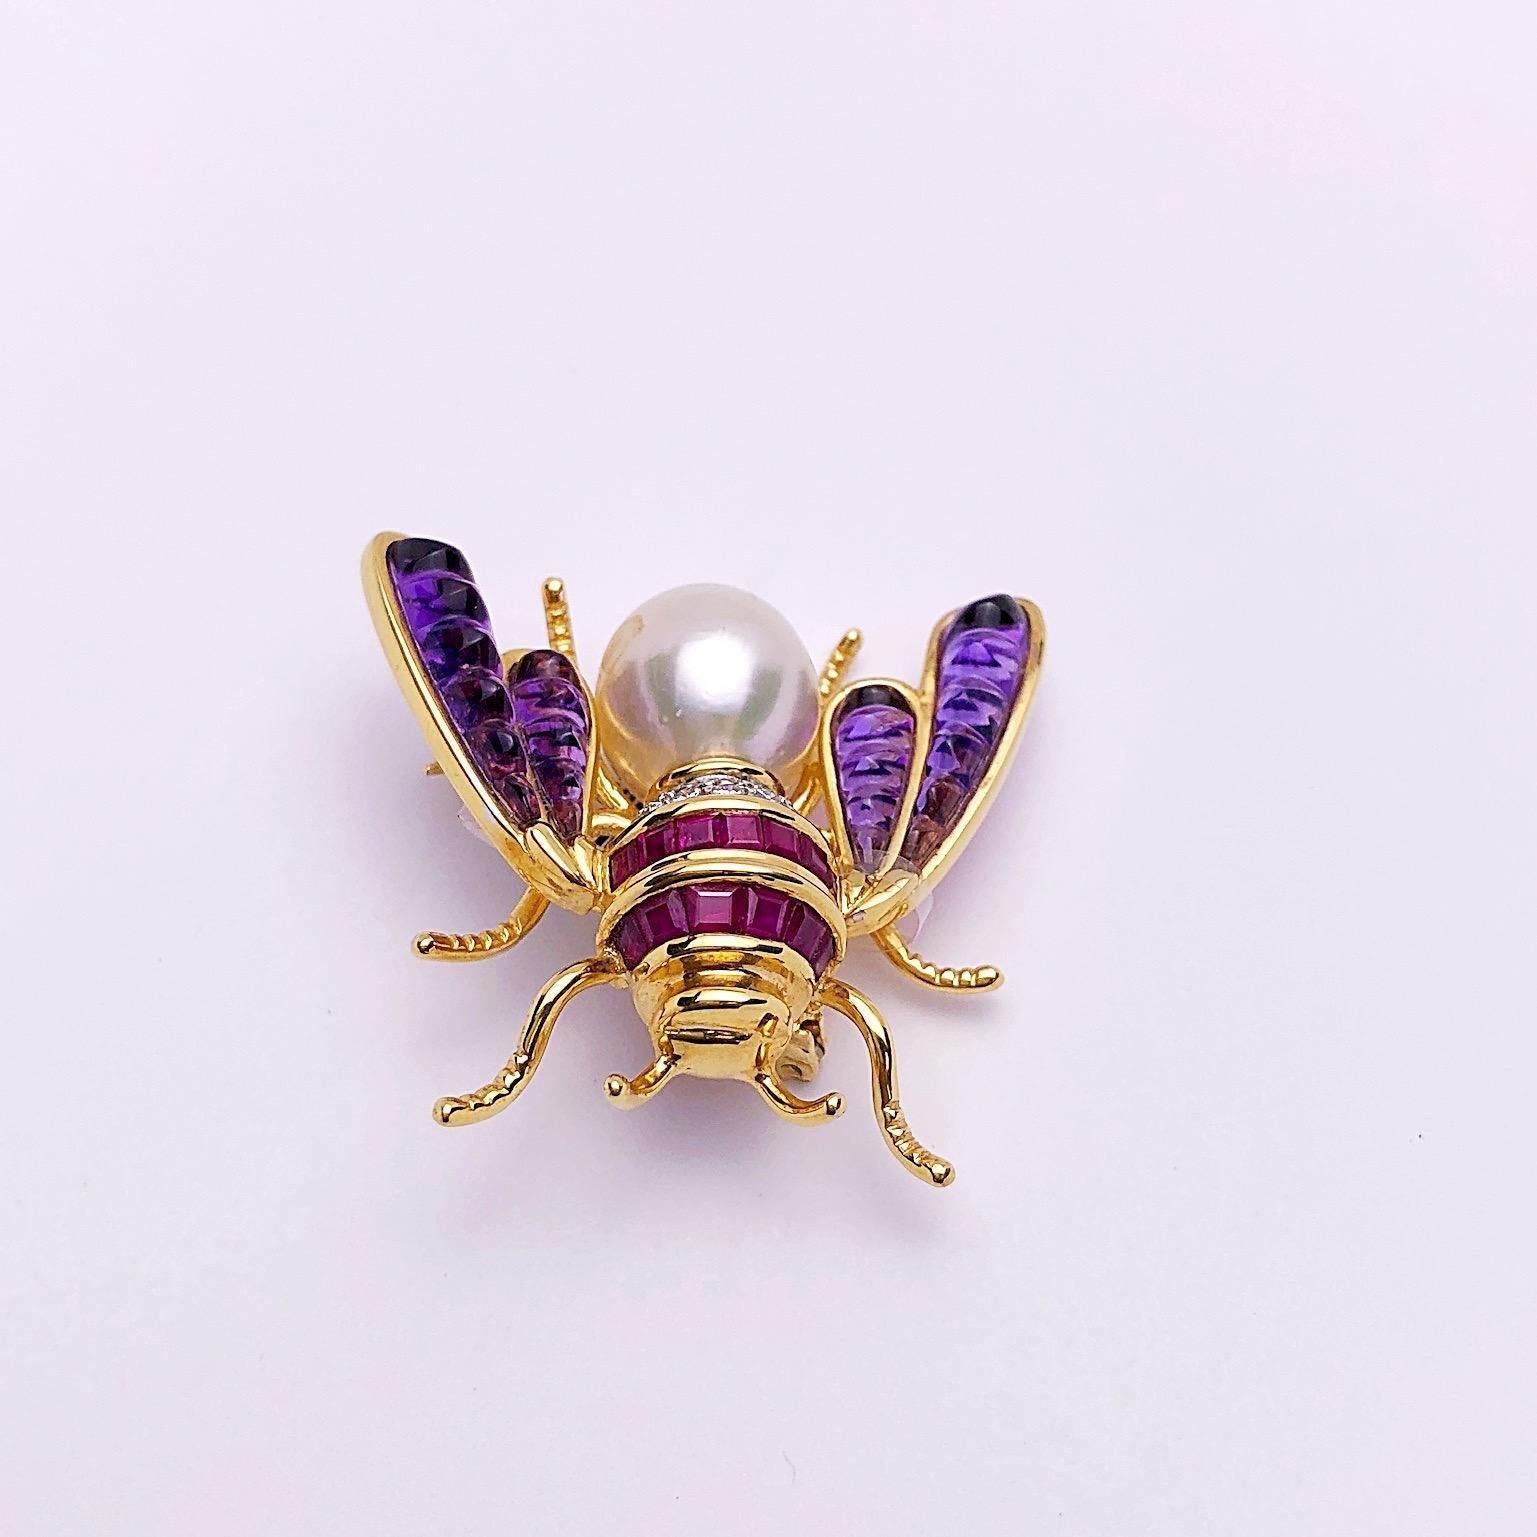 Beautifully detailed 18 karat yellow gold bee brooch. The brooch is intricately set with square cut rubies and round brilliant diamonds. The wings are set with sugarloaf cabochon amethyst and the body is a South Sea pearl.
The brooch measures 1 5/8